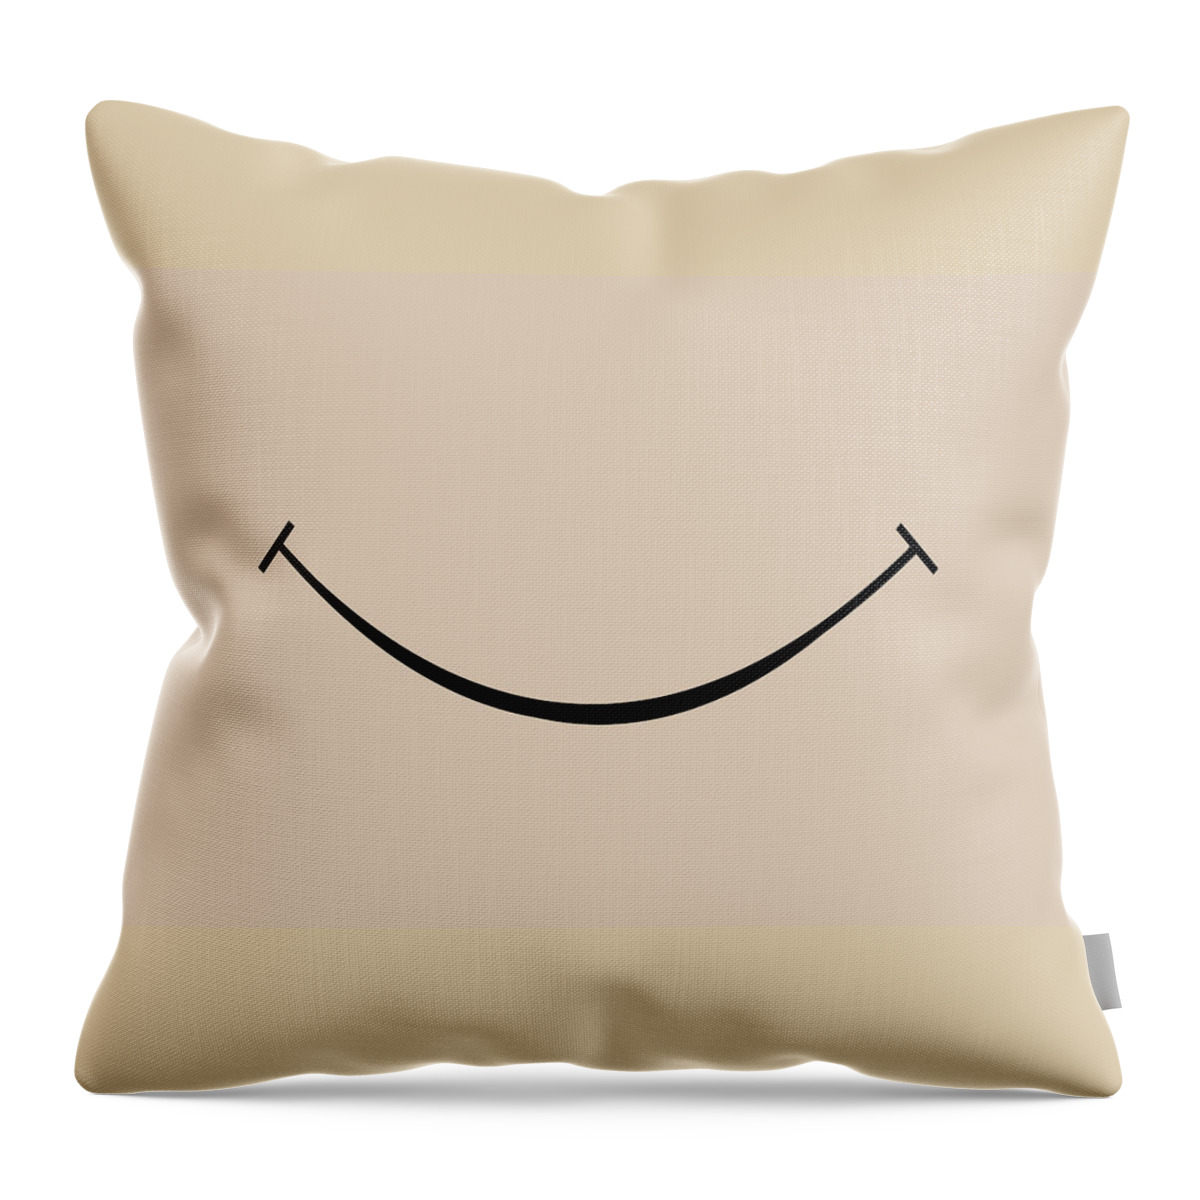 2d Throw Pillow featuring the digital art Smiling Face Mask by Brian Wallace